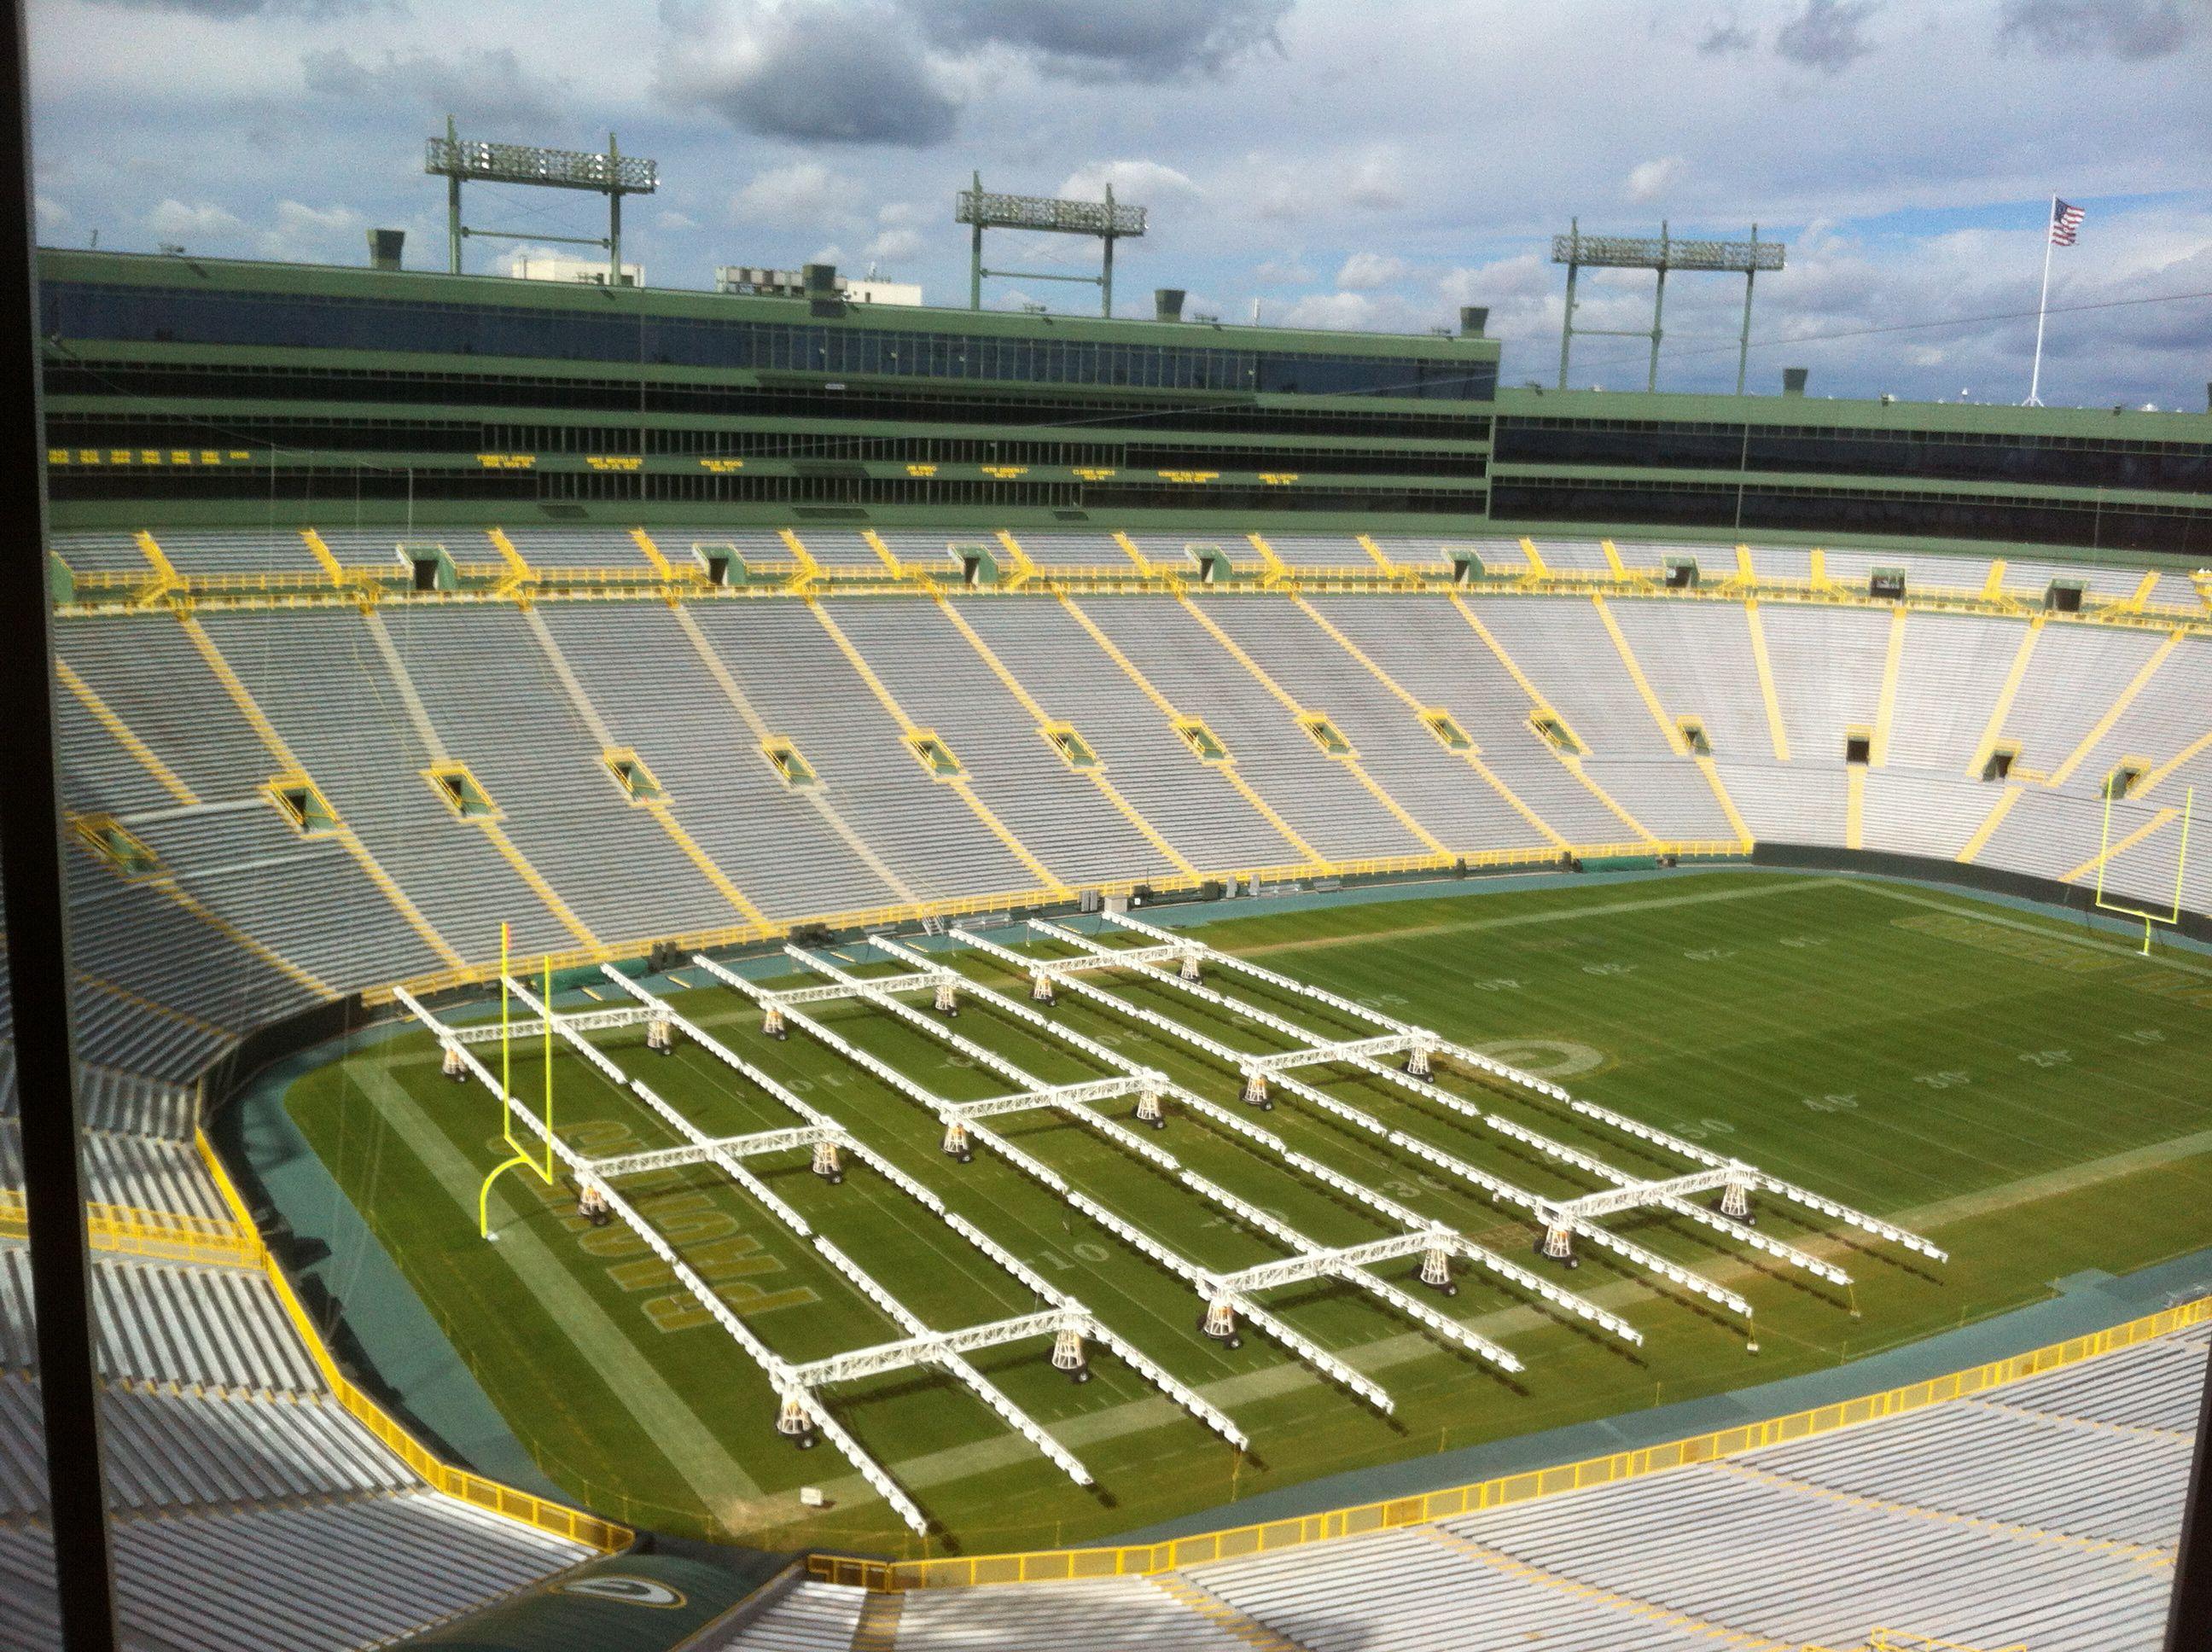 Green Bay Packers Stadium- Lambeau Field. Our Fostered Journey